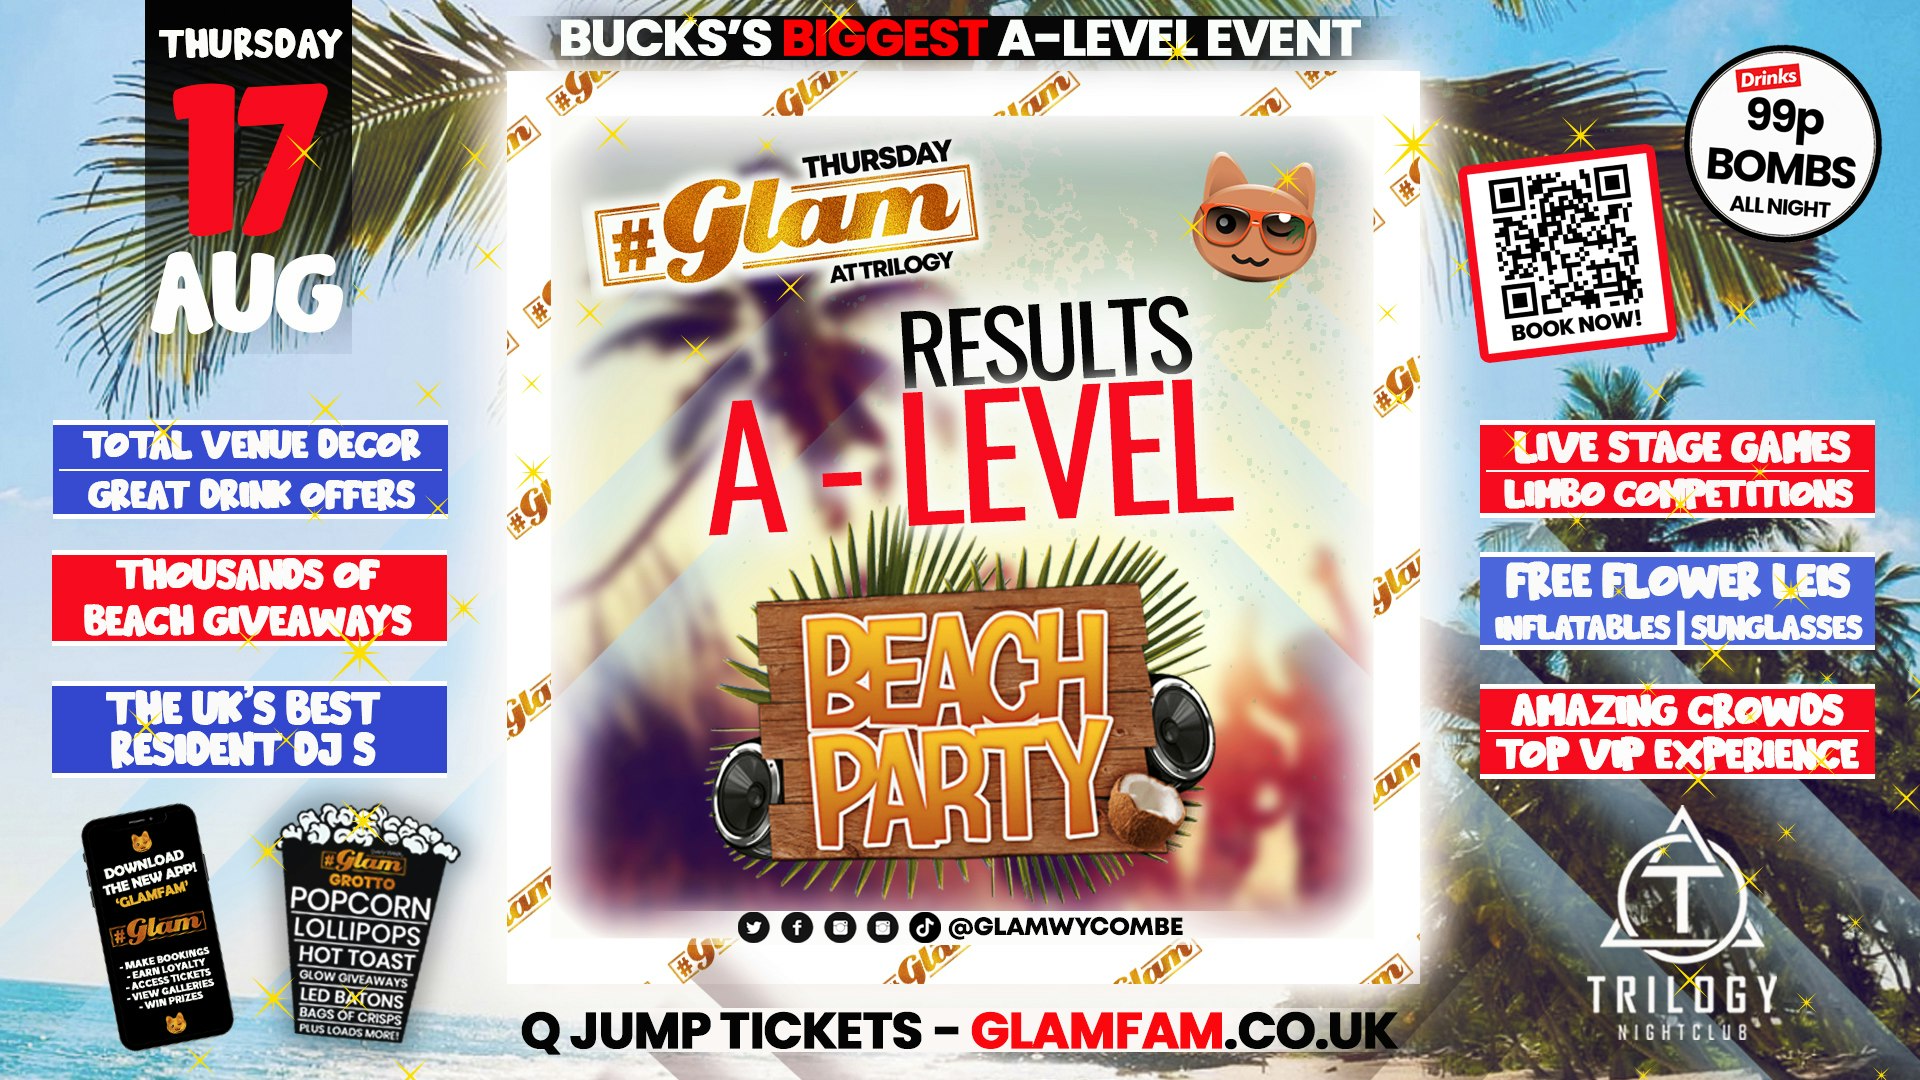 Glam High Wycombe |  A-LEVEL RESULTS – BEACH PARTY!